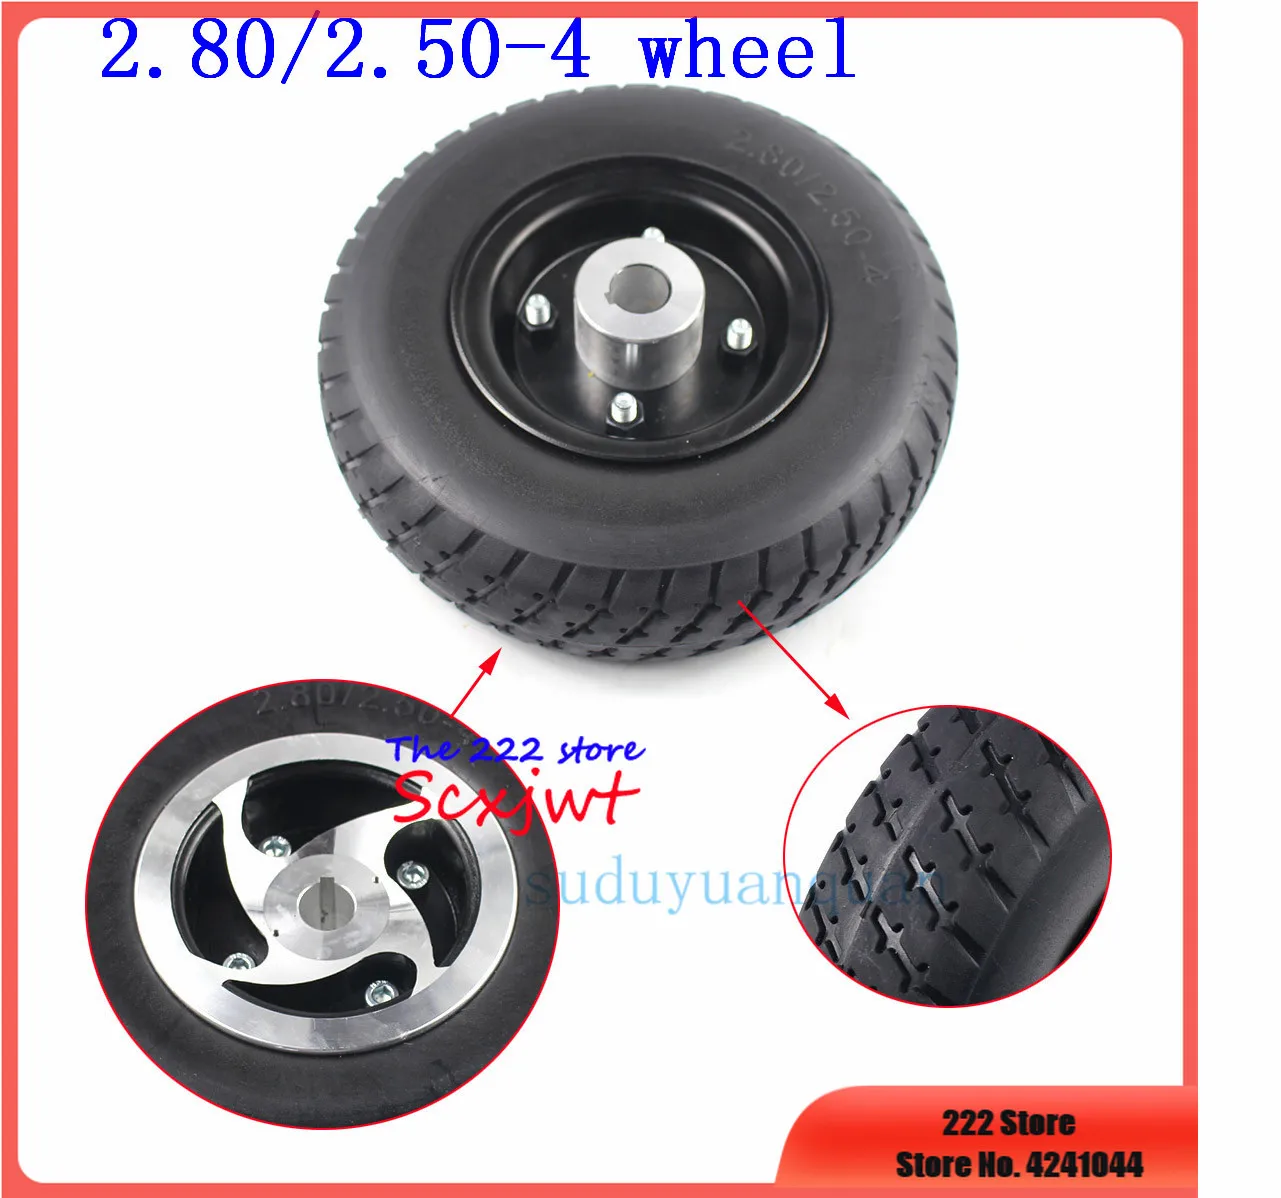 Battery Car Solid Tire 2.80/2.50-4 Elder Mobility Scooter Non-Inflatable Tyre 